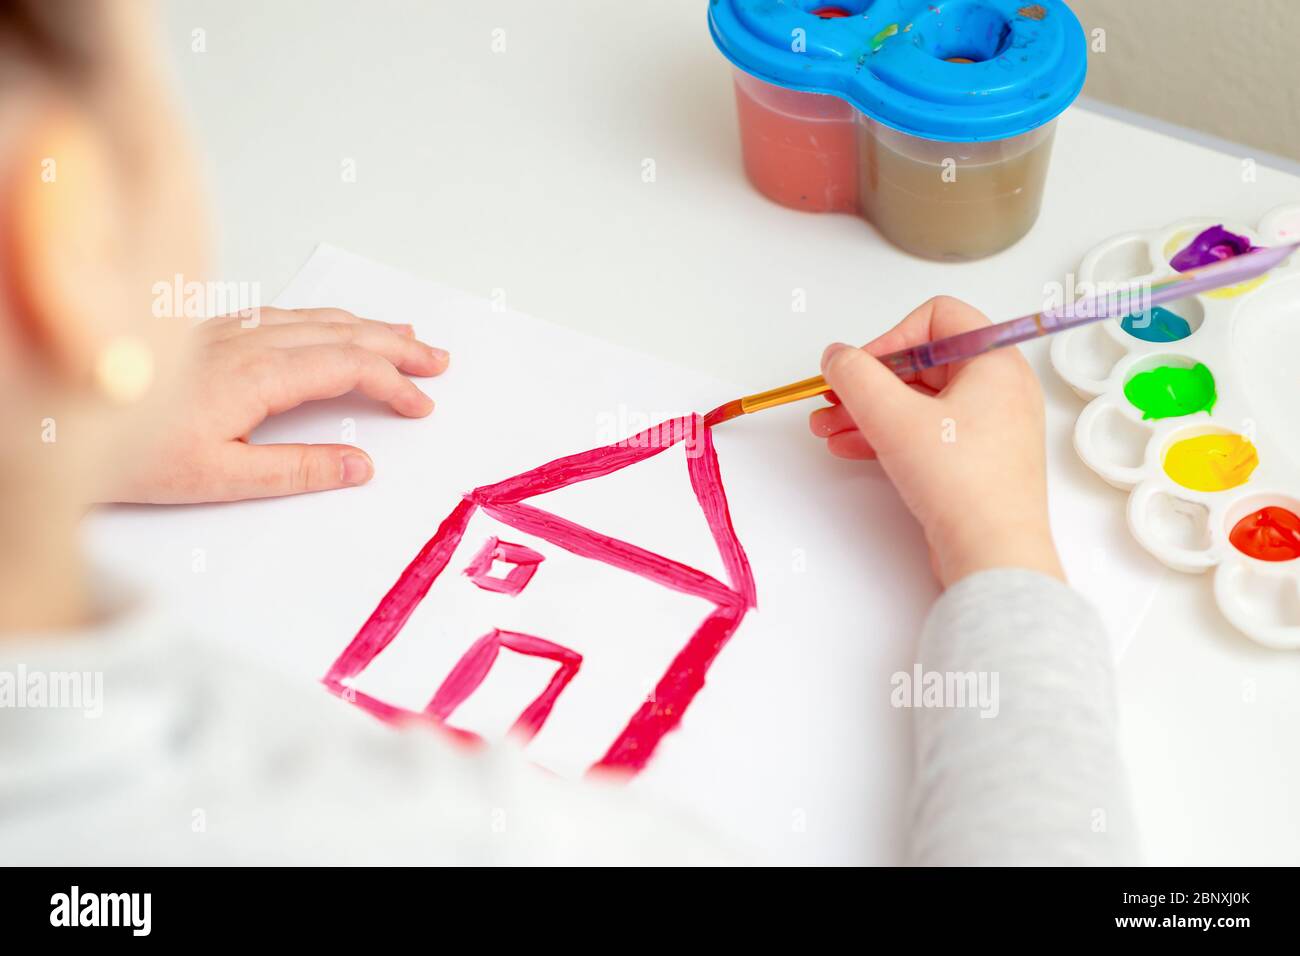 The hand of child drawing a house roof on white paper. Concept of creative learning. Stock Photo